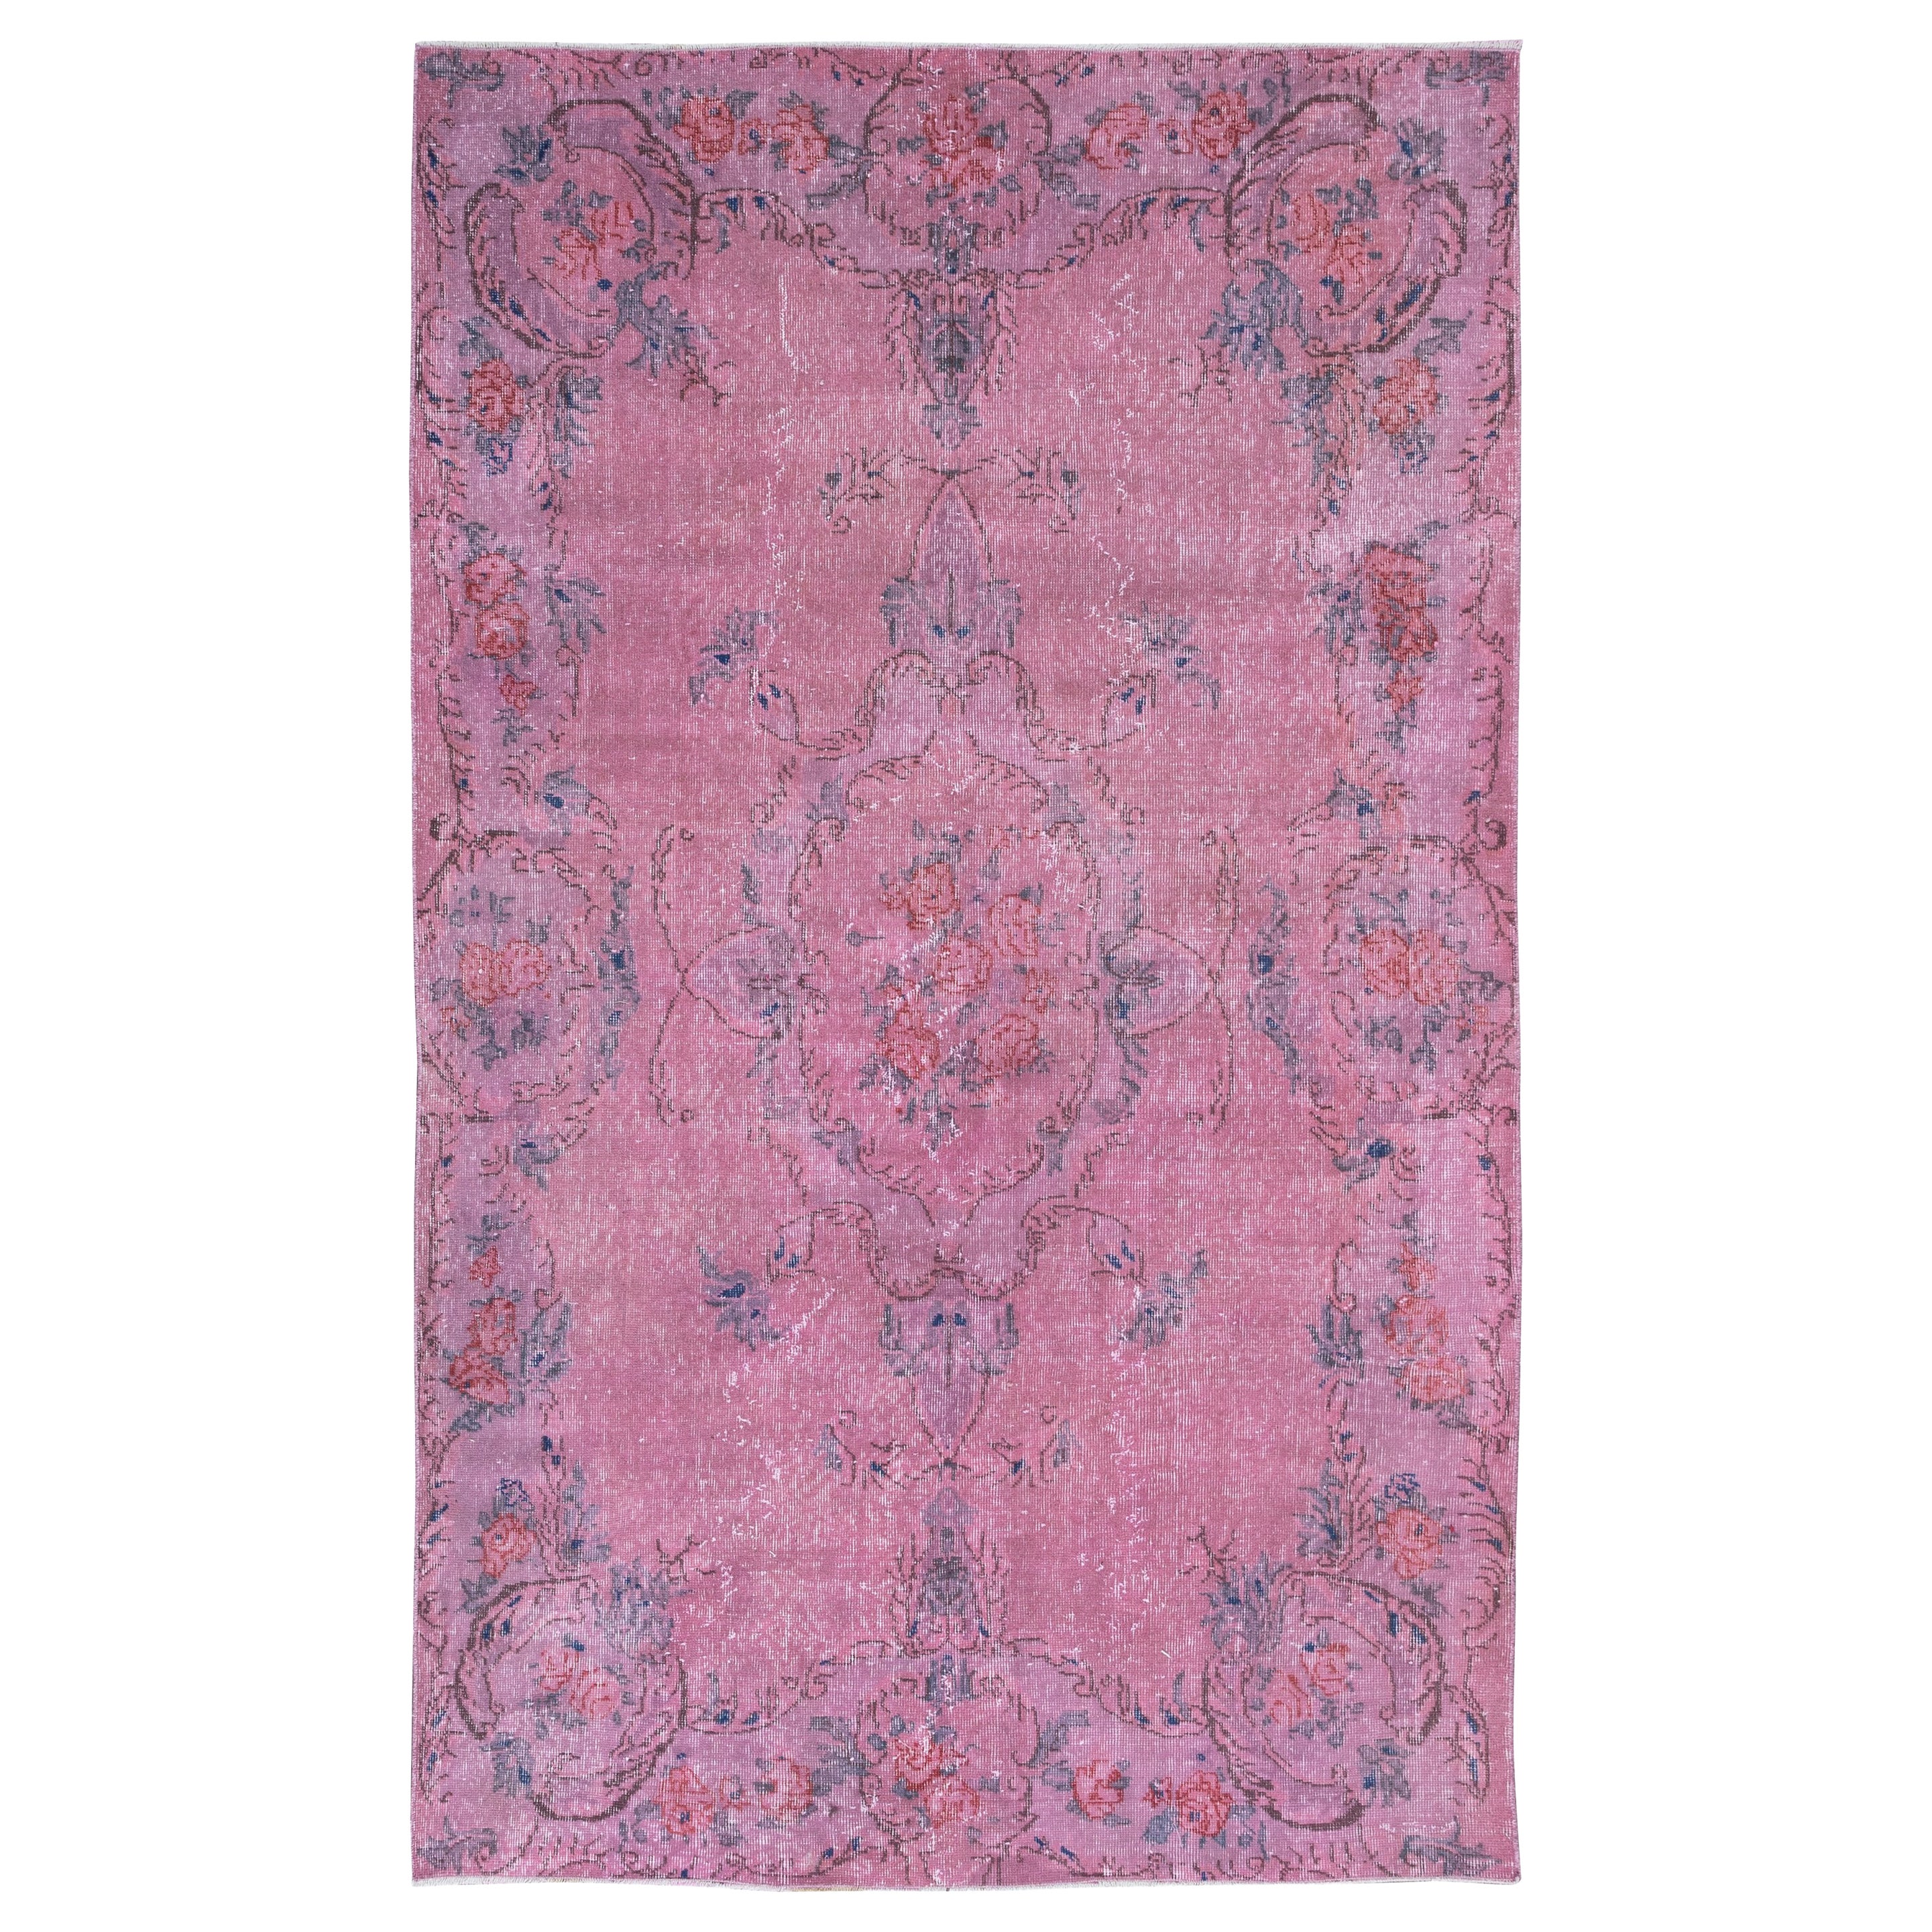 5.4x8.8 Ft Contemporary Handmade Turkish Floral Pattern Area Rug in Soft Pink